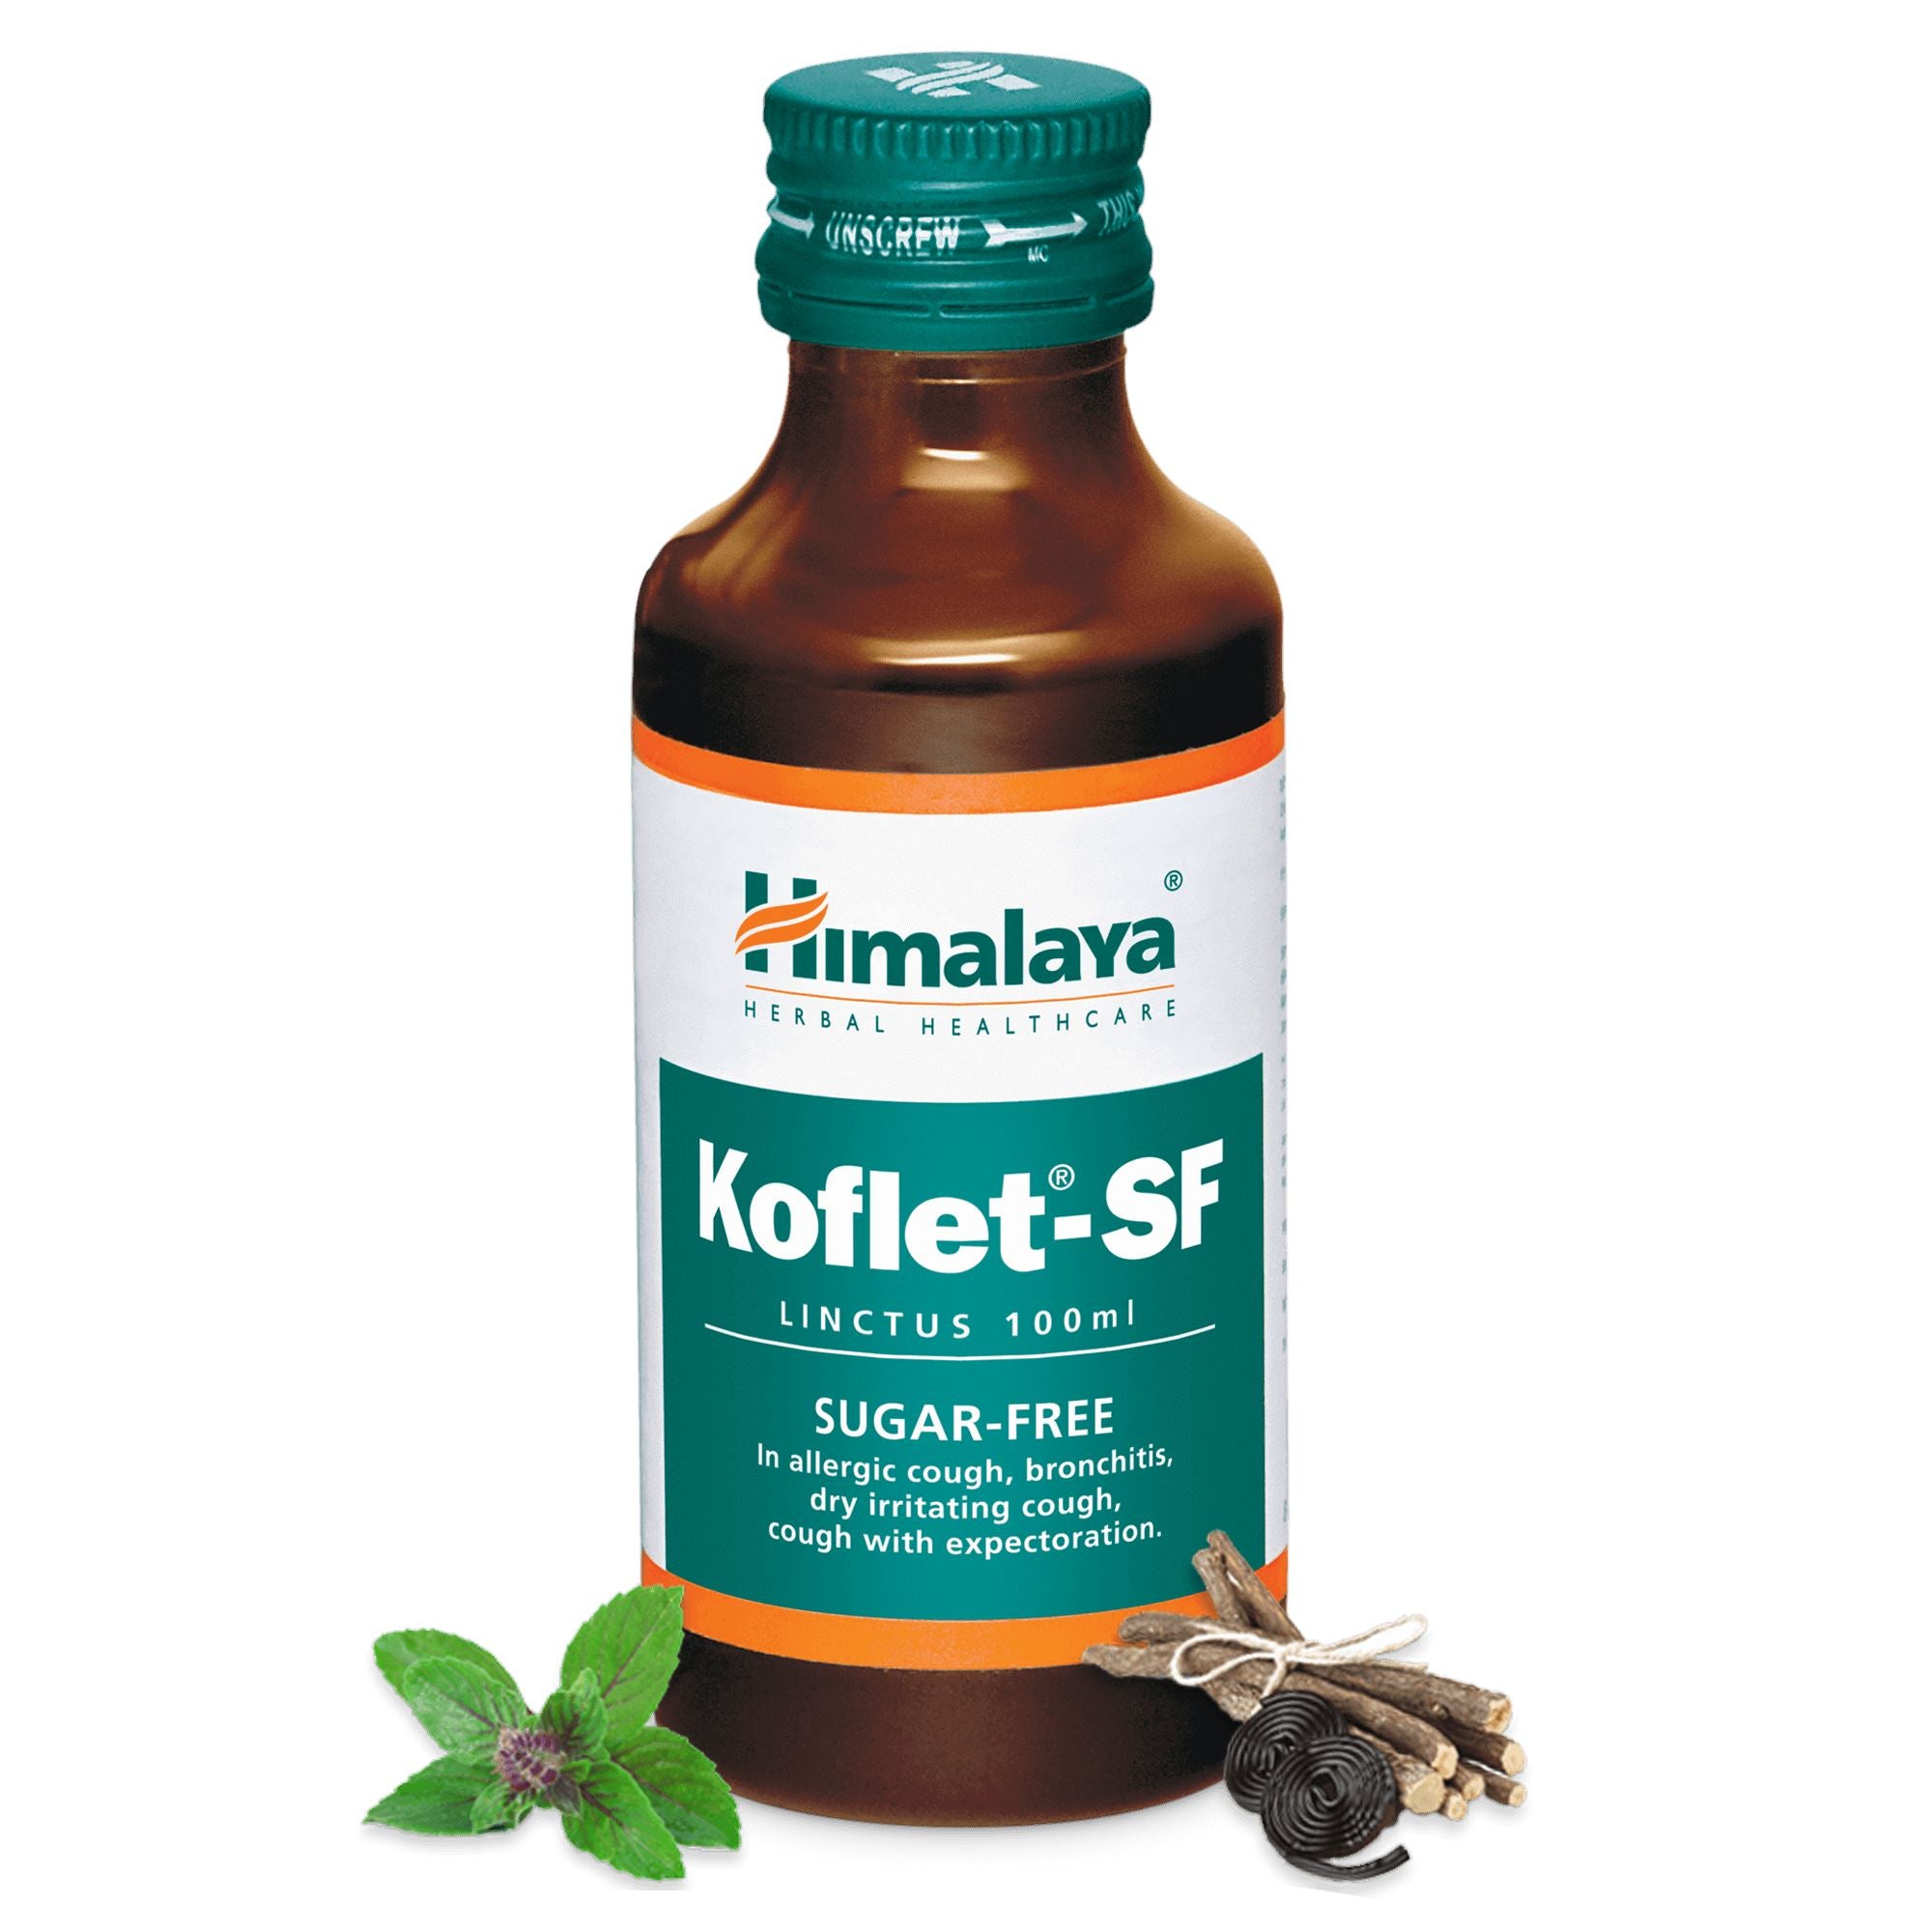 Himalaya Koflet-SF Linctus - Sugar-free cough syrup for wet and dry cough